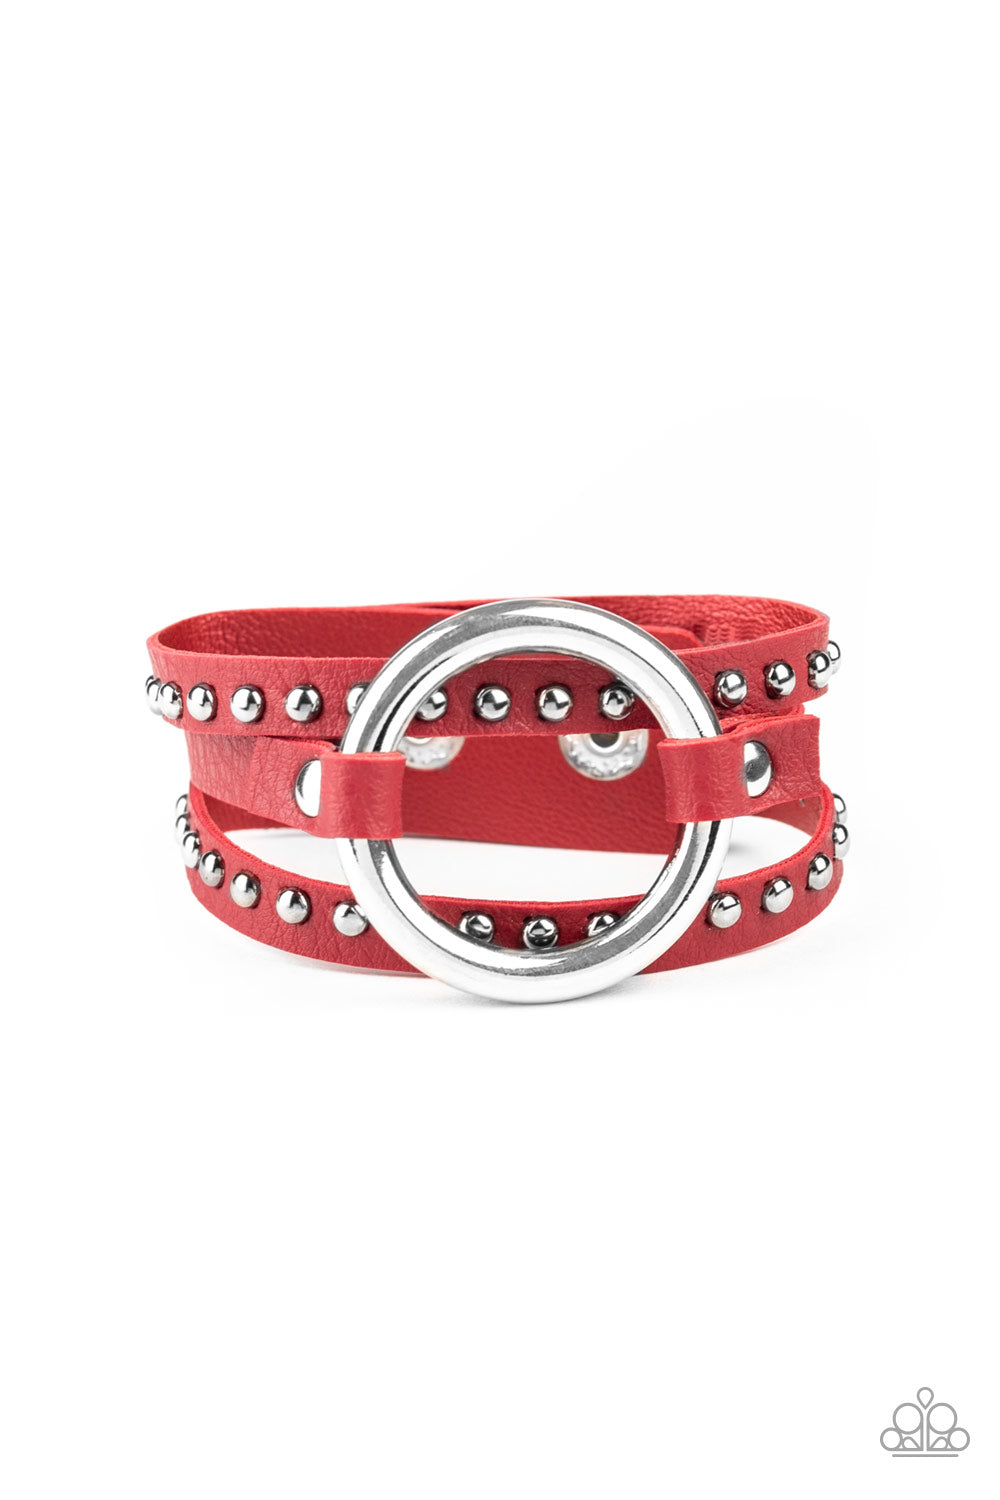 Studded Statement-Maker - Red - Jazzy Jewels With Lady J